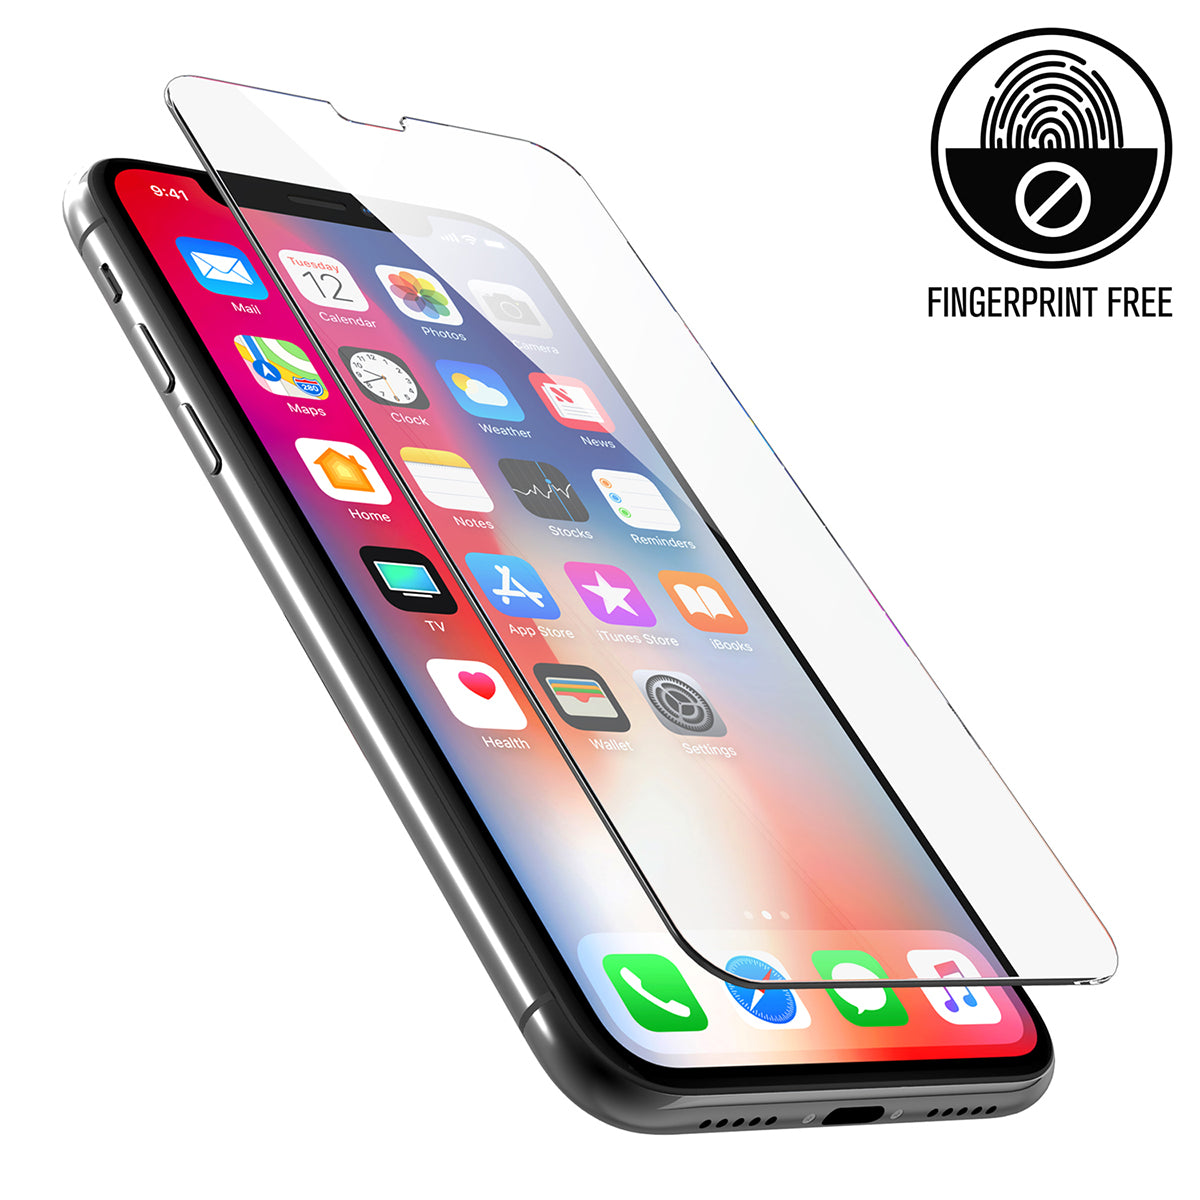 Catalyst Add a Tempered Glass Screen Protector and iphone text reads fingerprint free